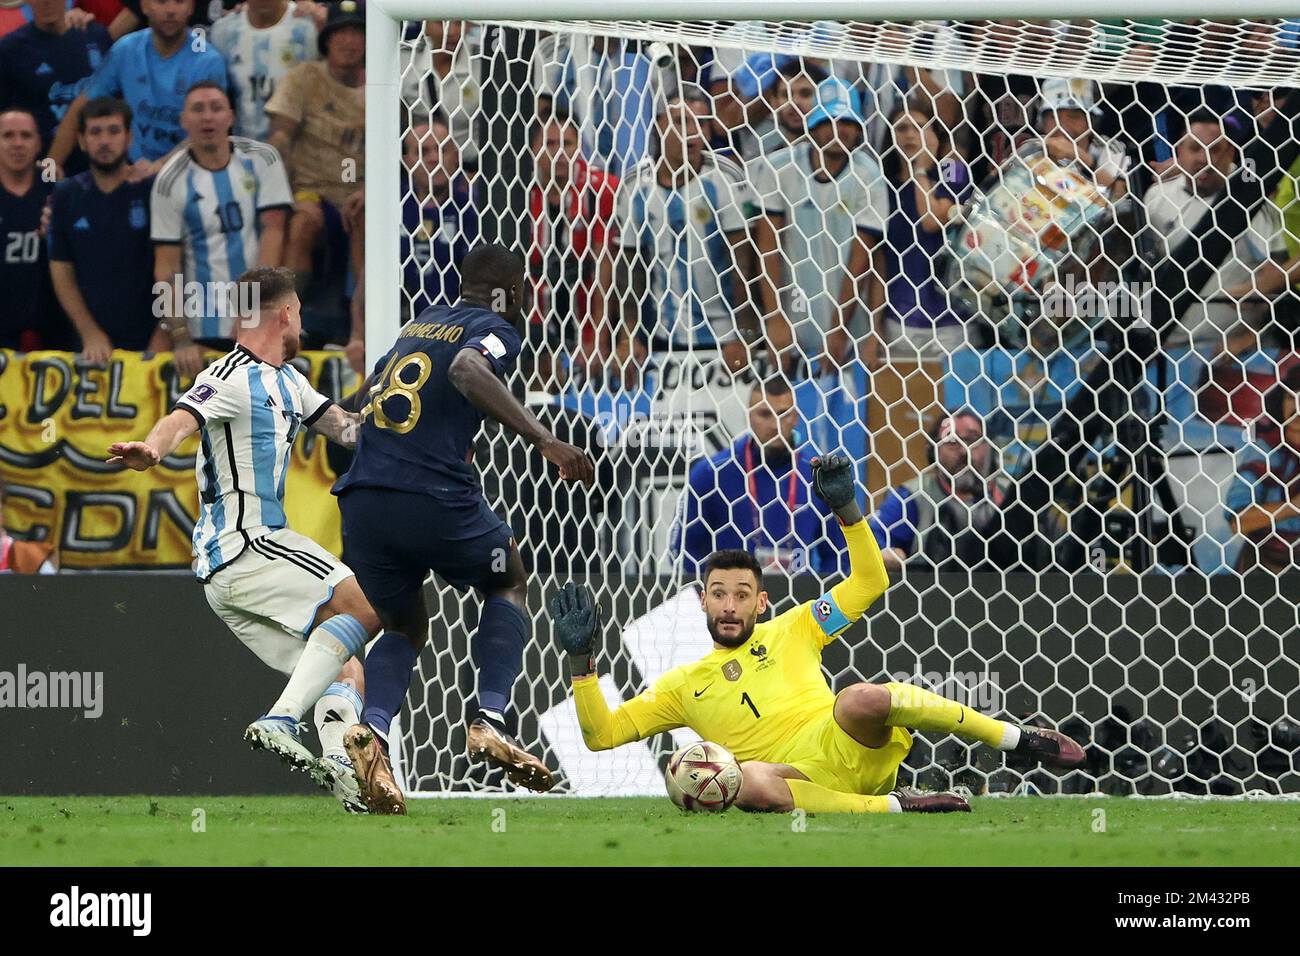 LUSAIL CITY, QATAR - DECEMBER 18: Goalkeeper Hugo Lloris of France in action during the FIFA World Cup Qatar 2022 Final match between Argentina and France at Lusail Stadium on December 18, 2022 in Lusail City, Qatar. Photo: Goran Stanzl/PIXSELL Stock Photo